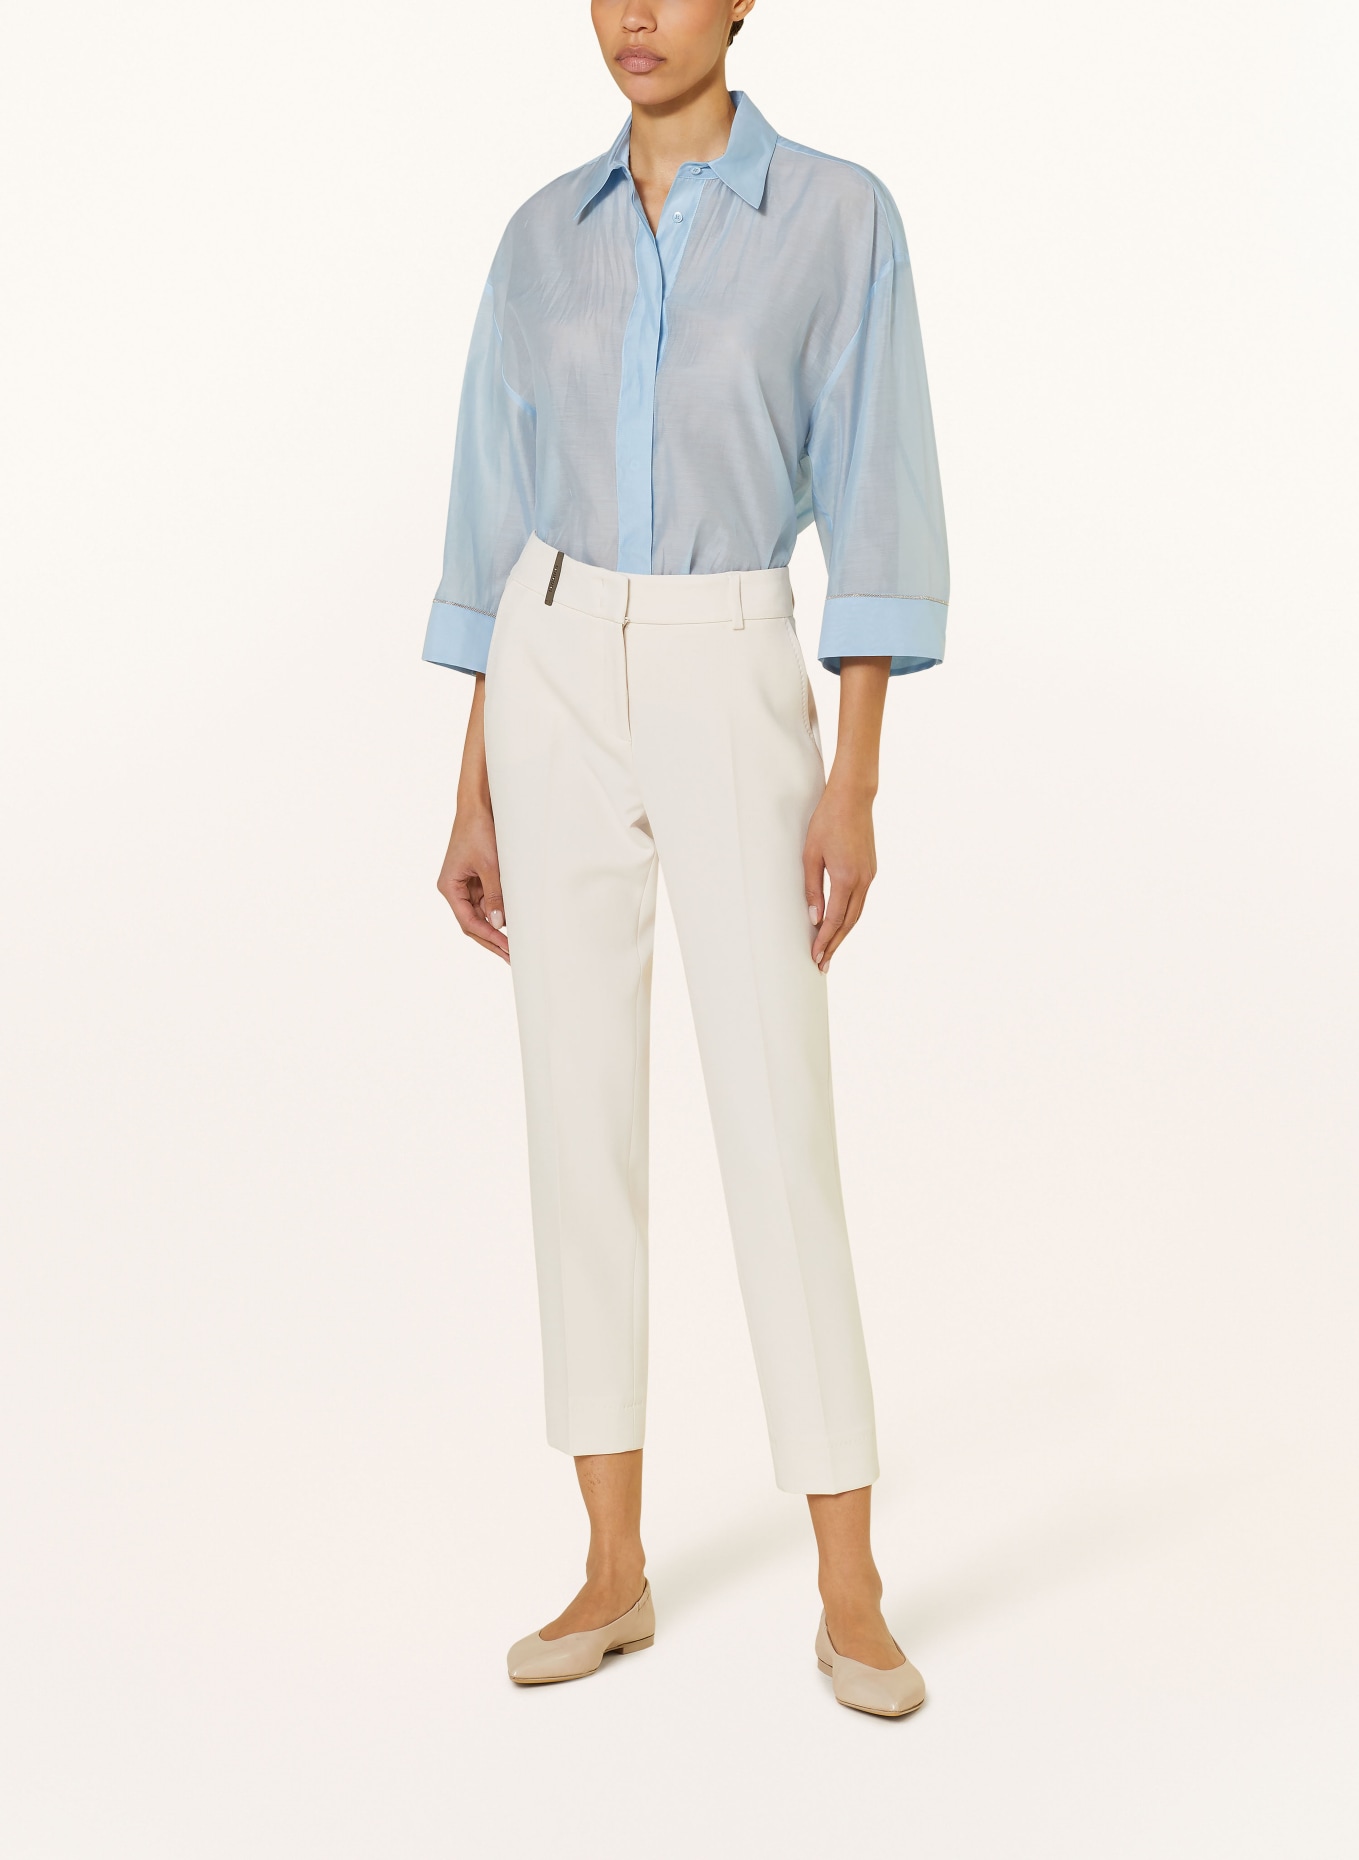 PESERICO Shirt blouse with silk and 3/4 sleeves, Color: LIGHT BLUE (Image 2)